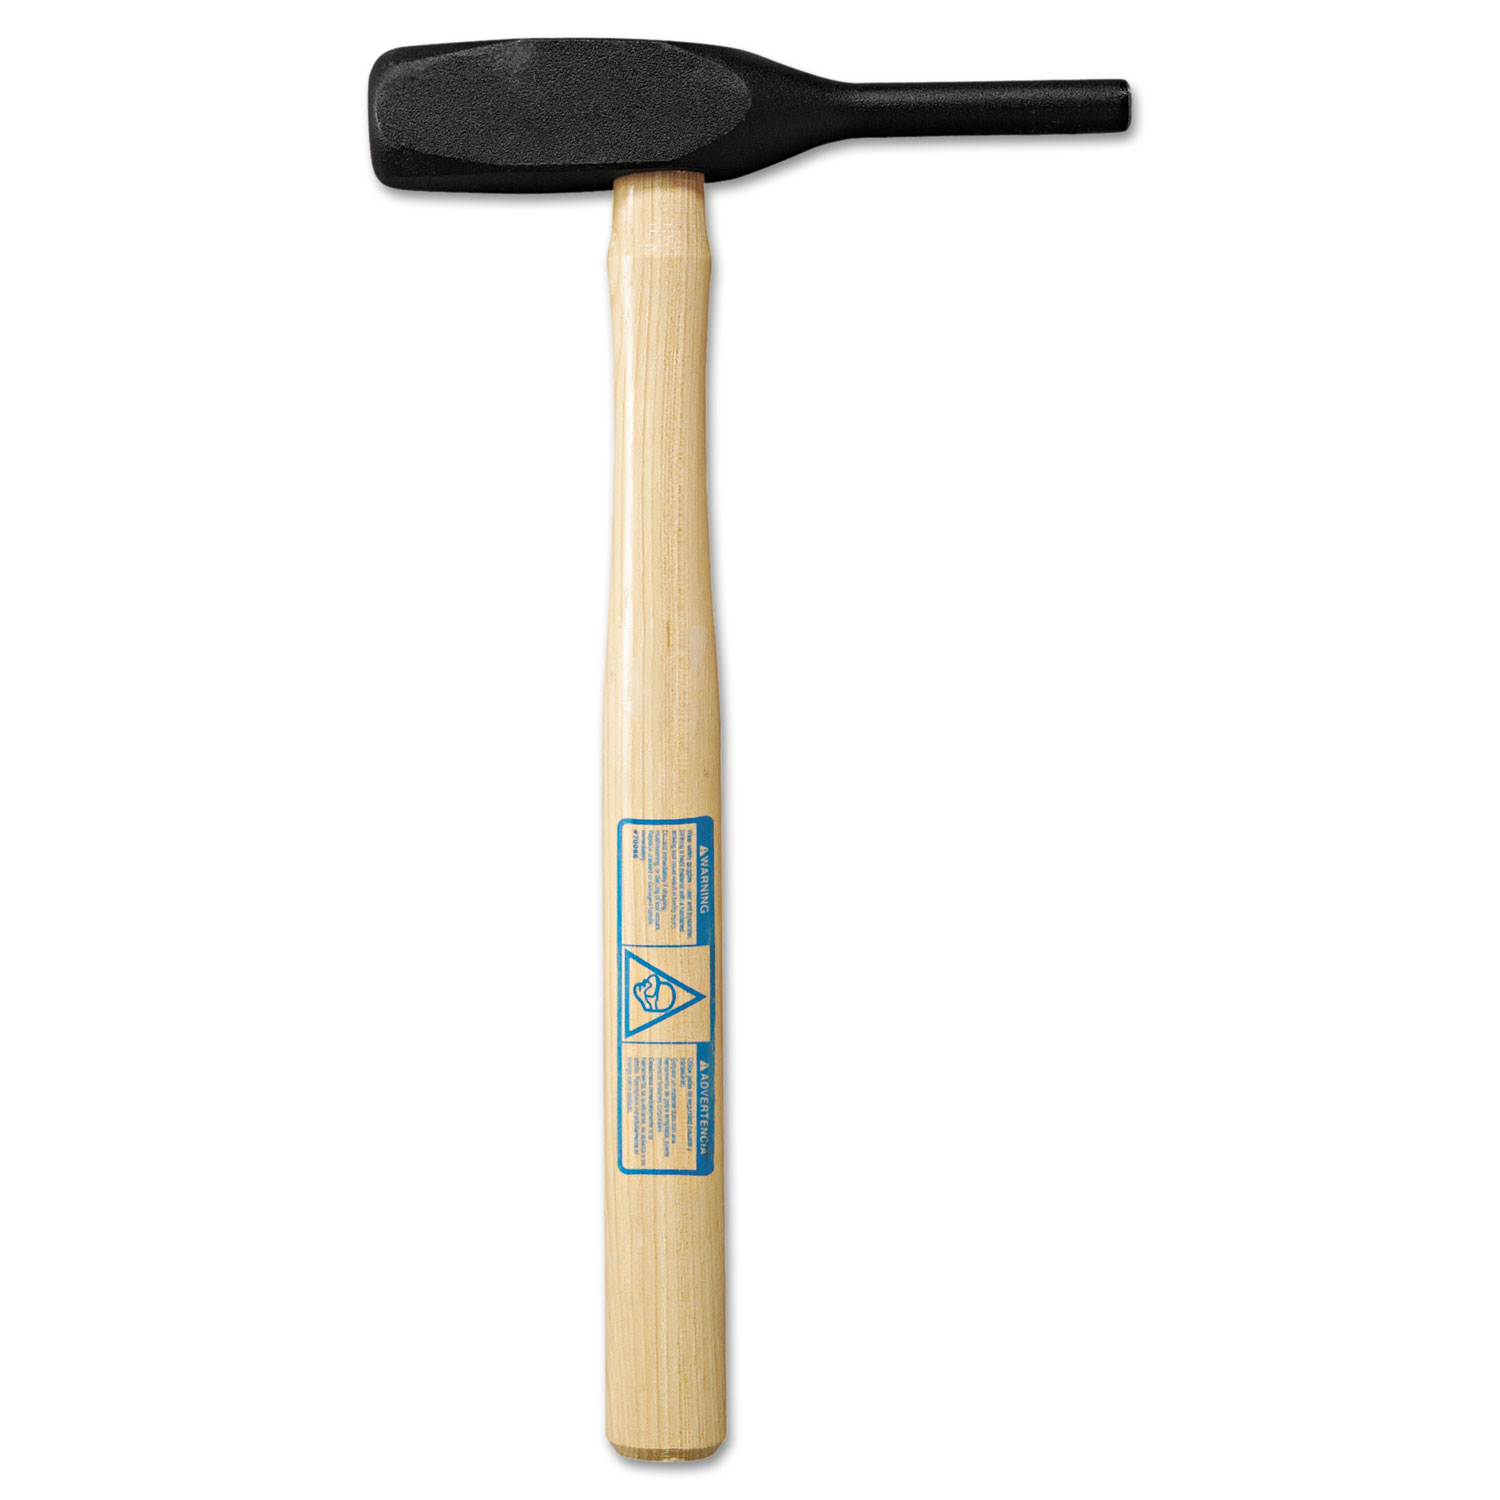 68901 Backing-Out Punch Hammer, 2.25lb, 5/8 dia, 16 Hickory Handle